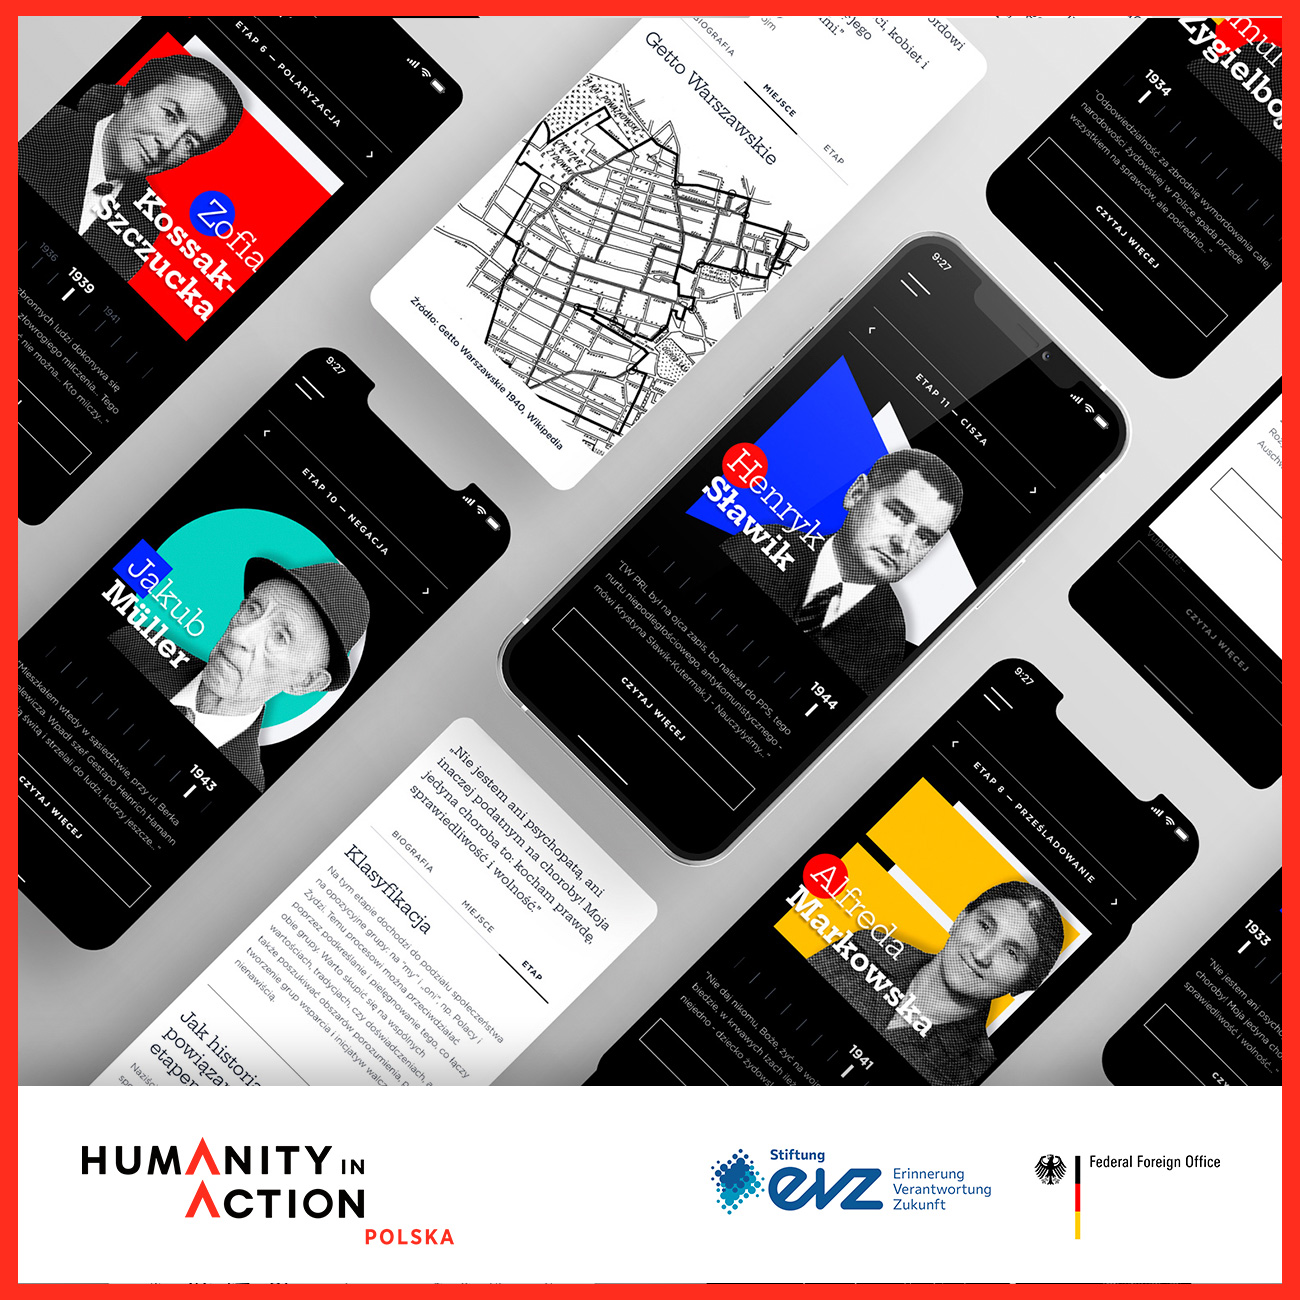 11 STAGES app - raising awareness on genocides and Holocaust